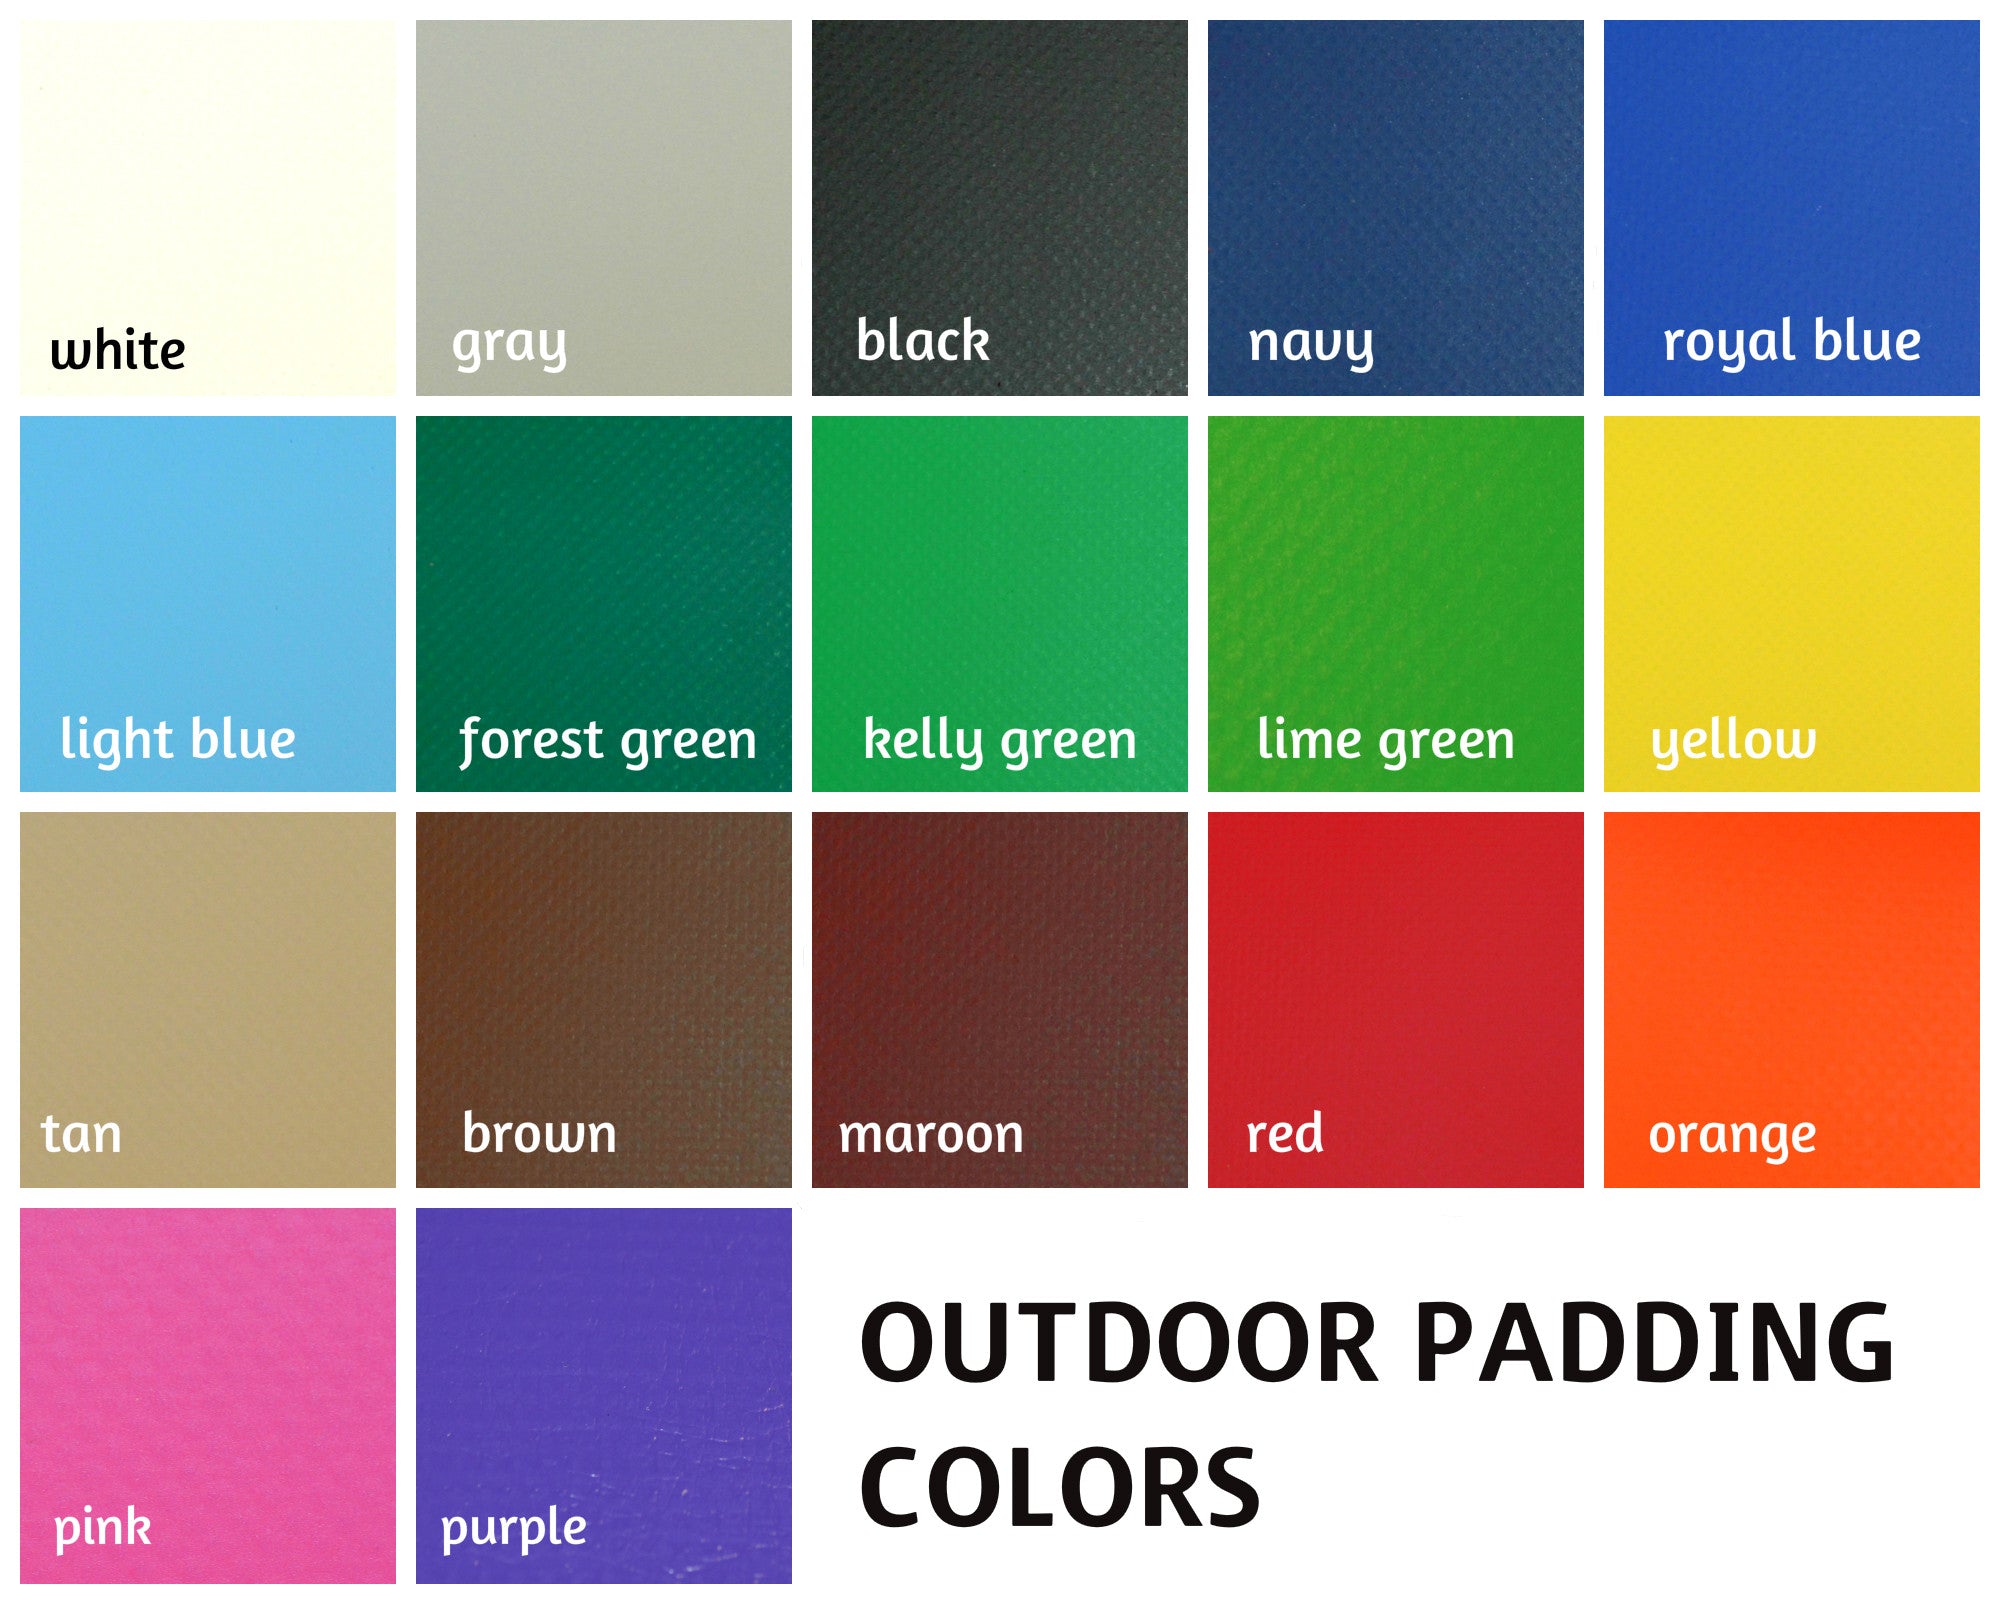 Outdoor padding color chart